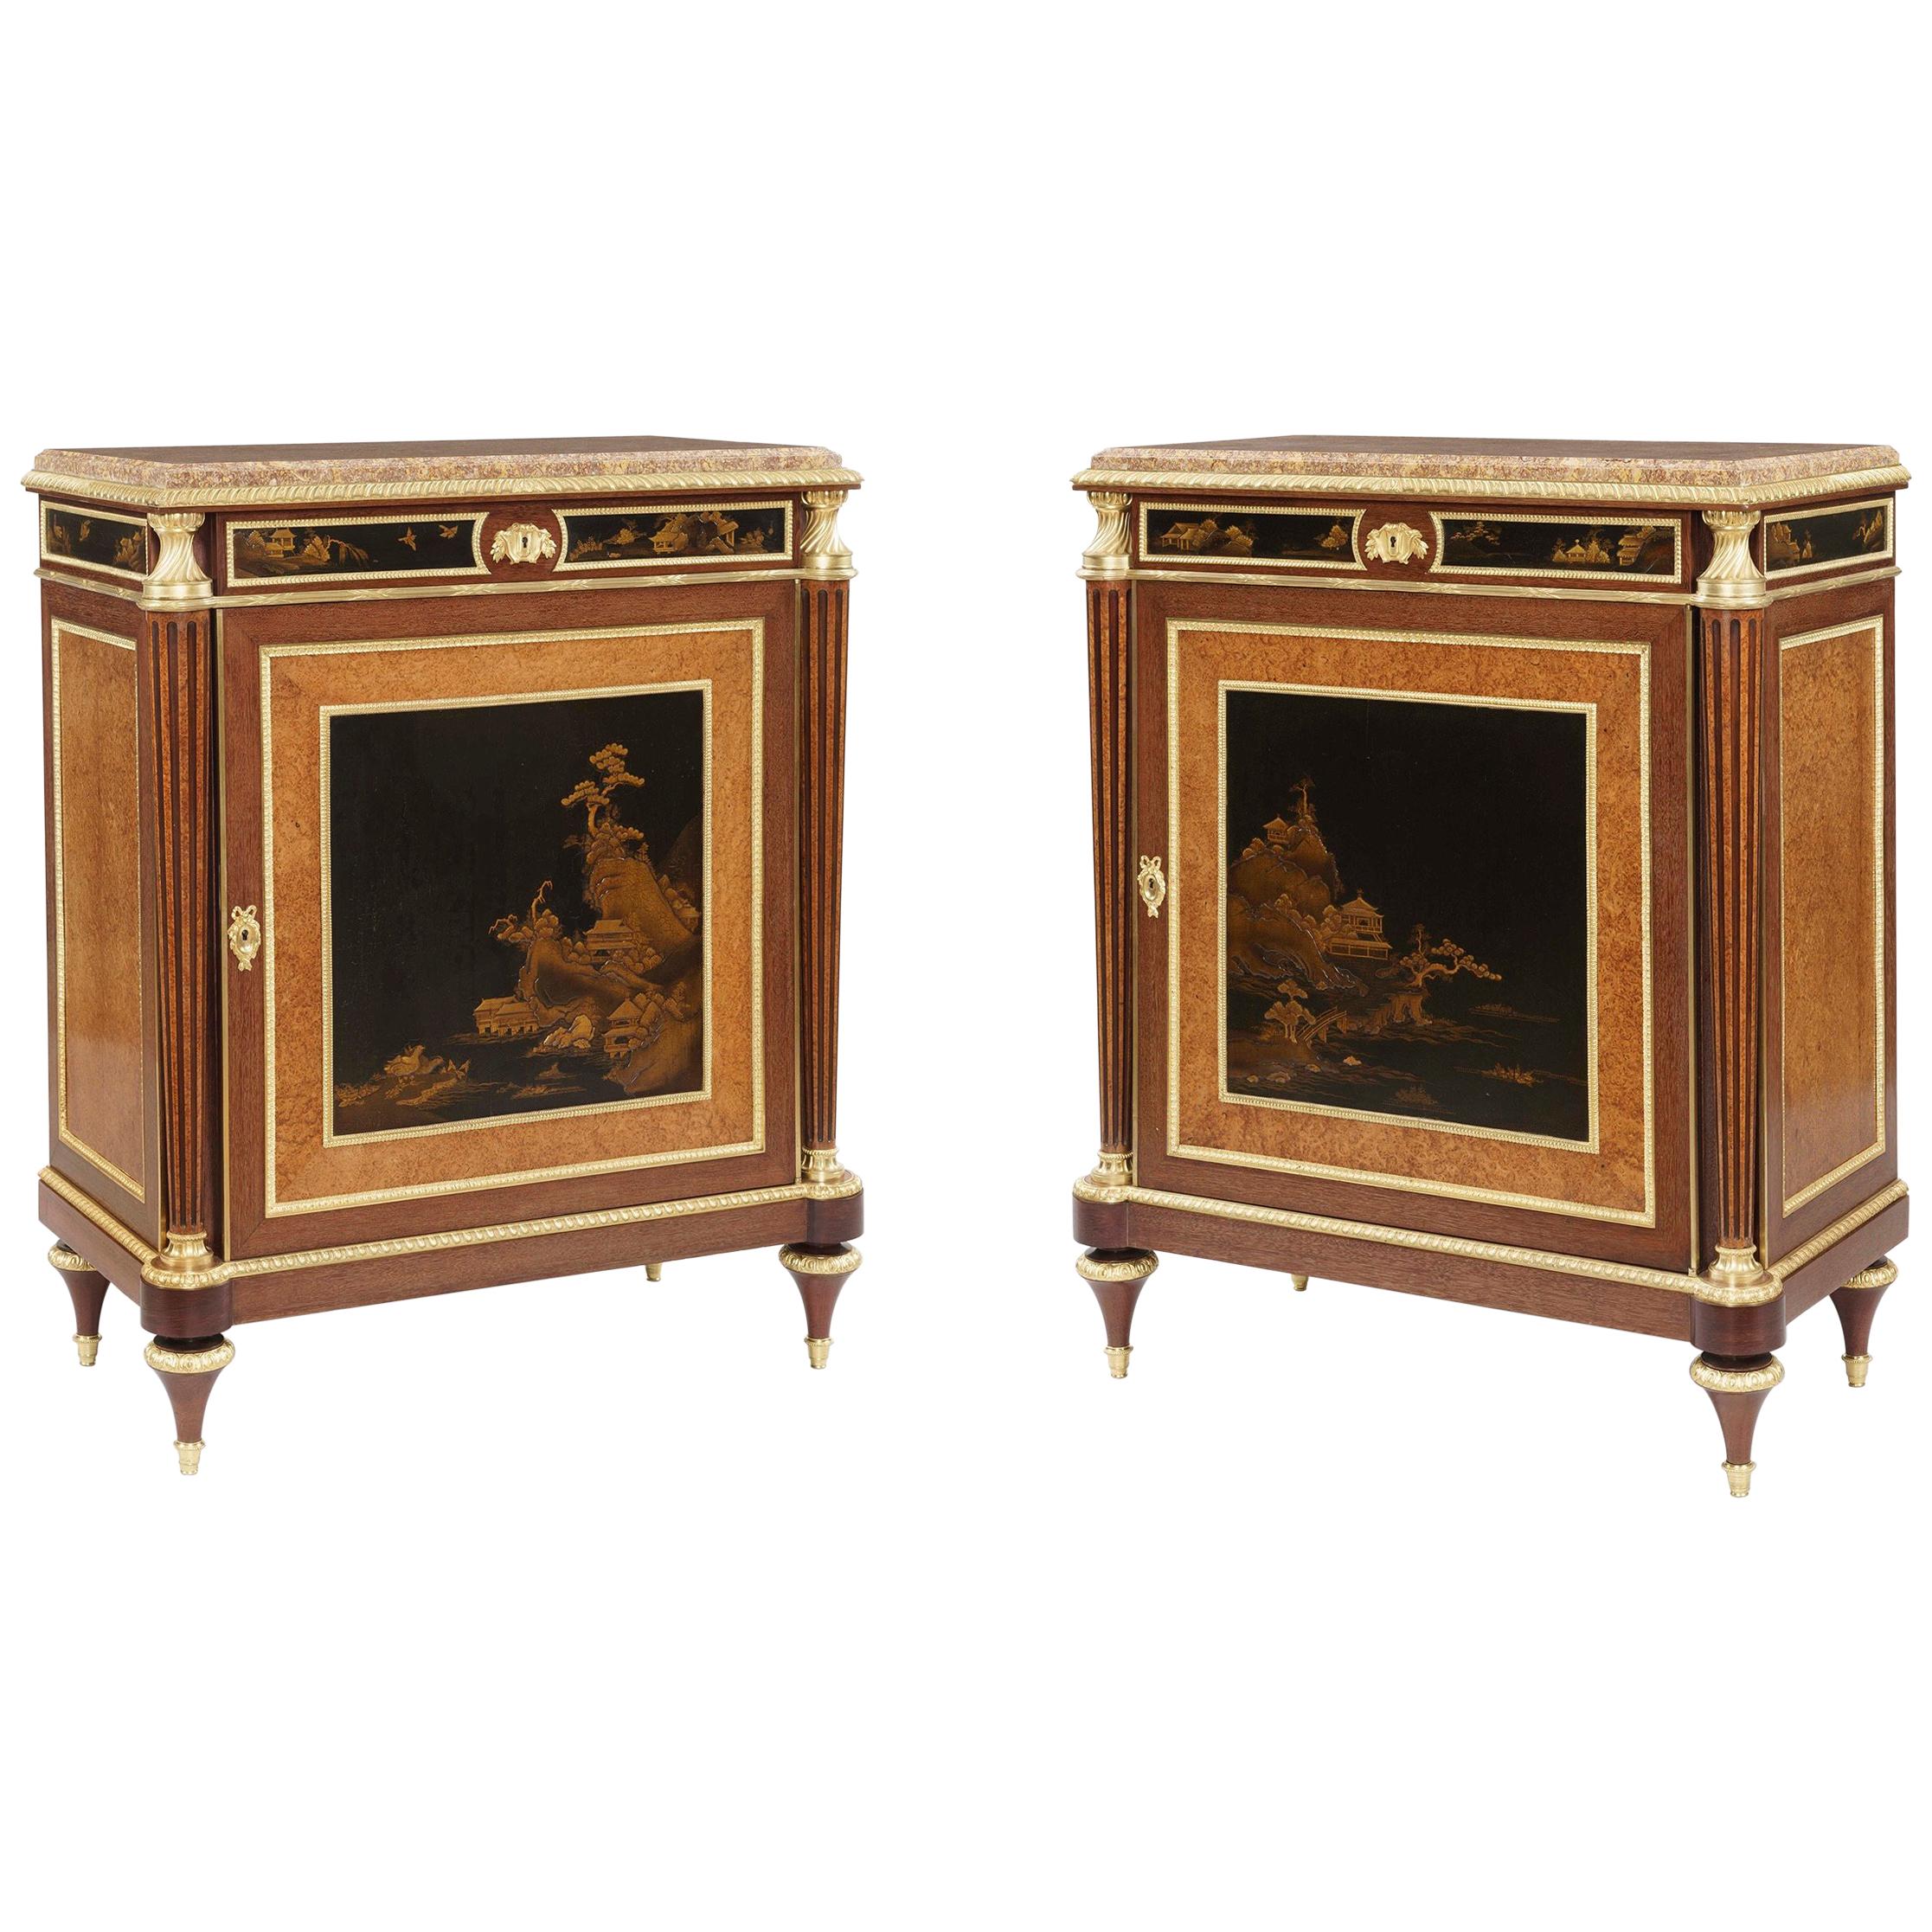 Unrivalled Pair of 19th Century Cabinets with Lacquer Panels